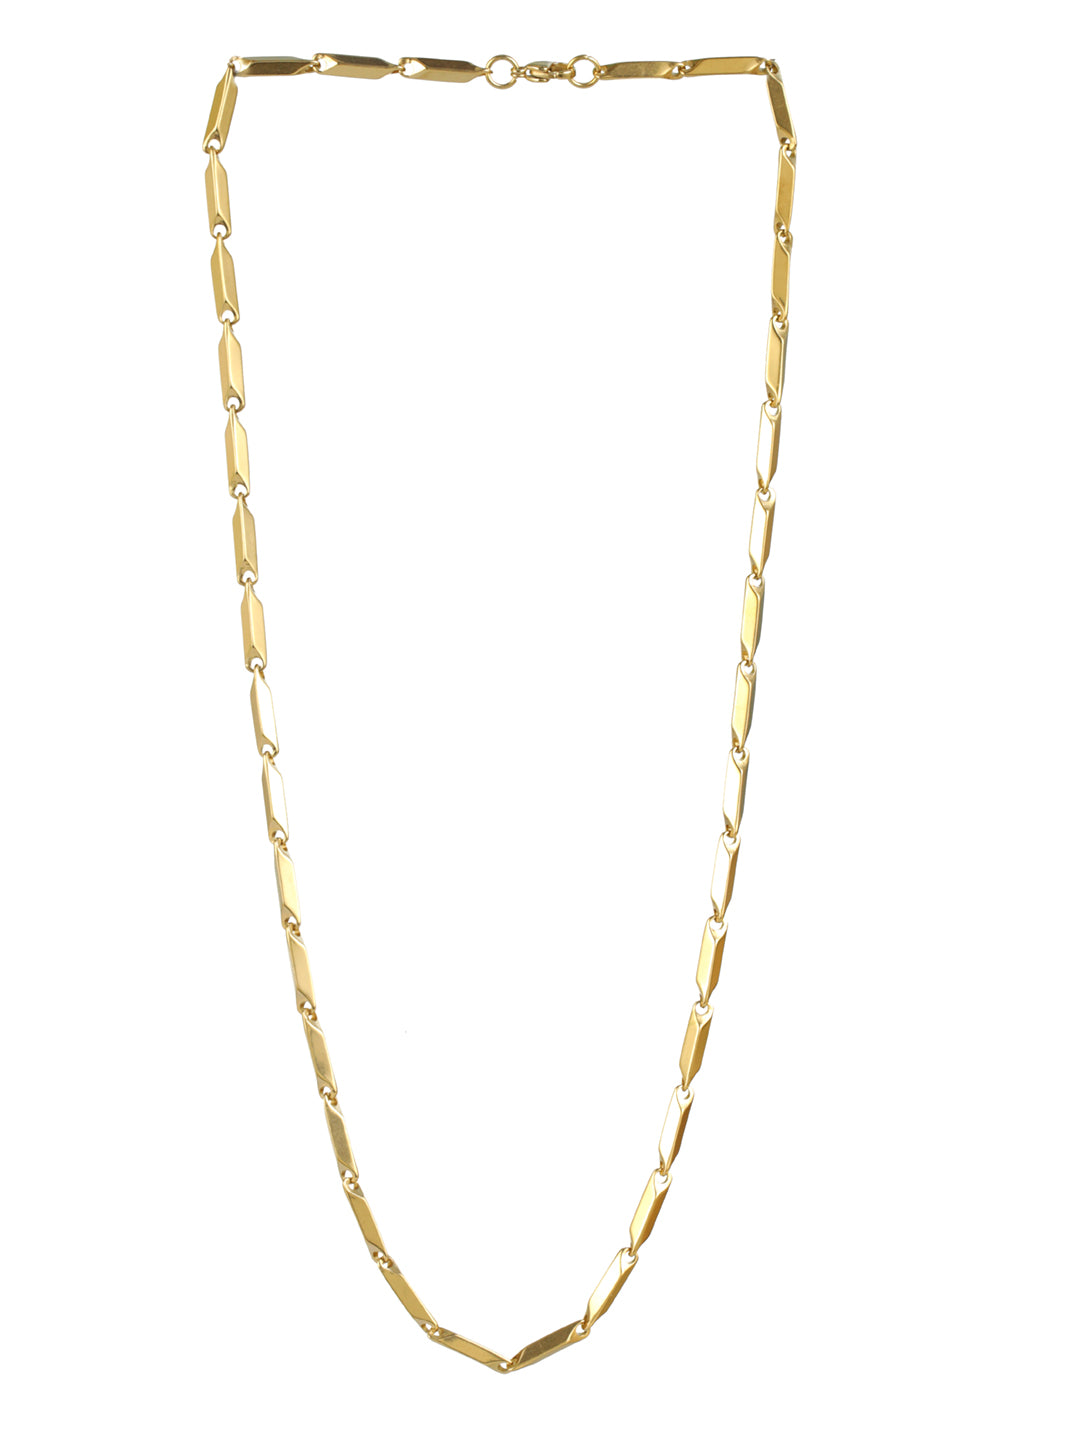 Twisted Cuboids Gold-Plated Link Chain for Men